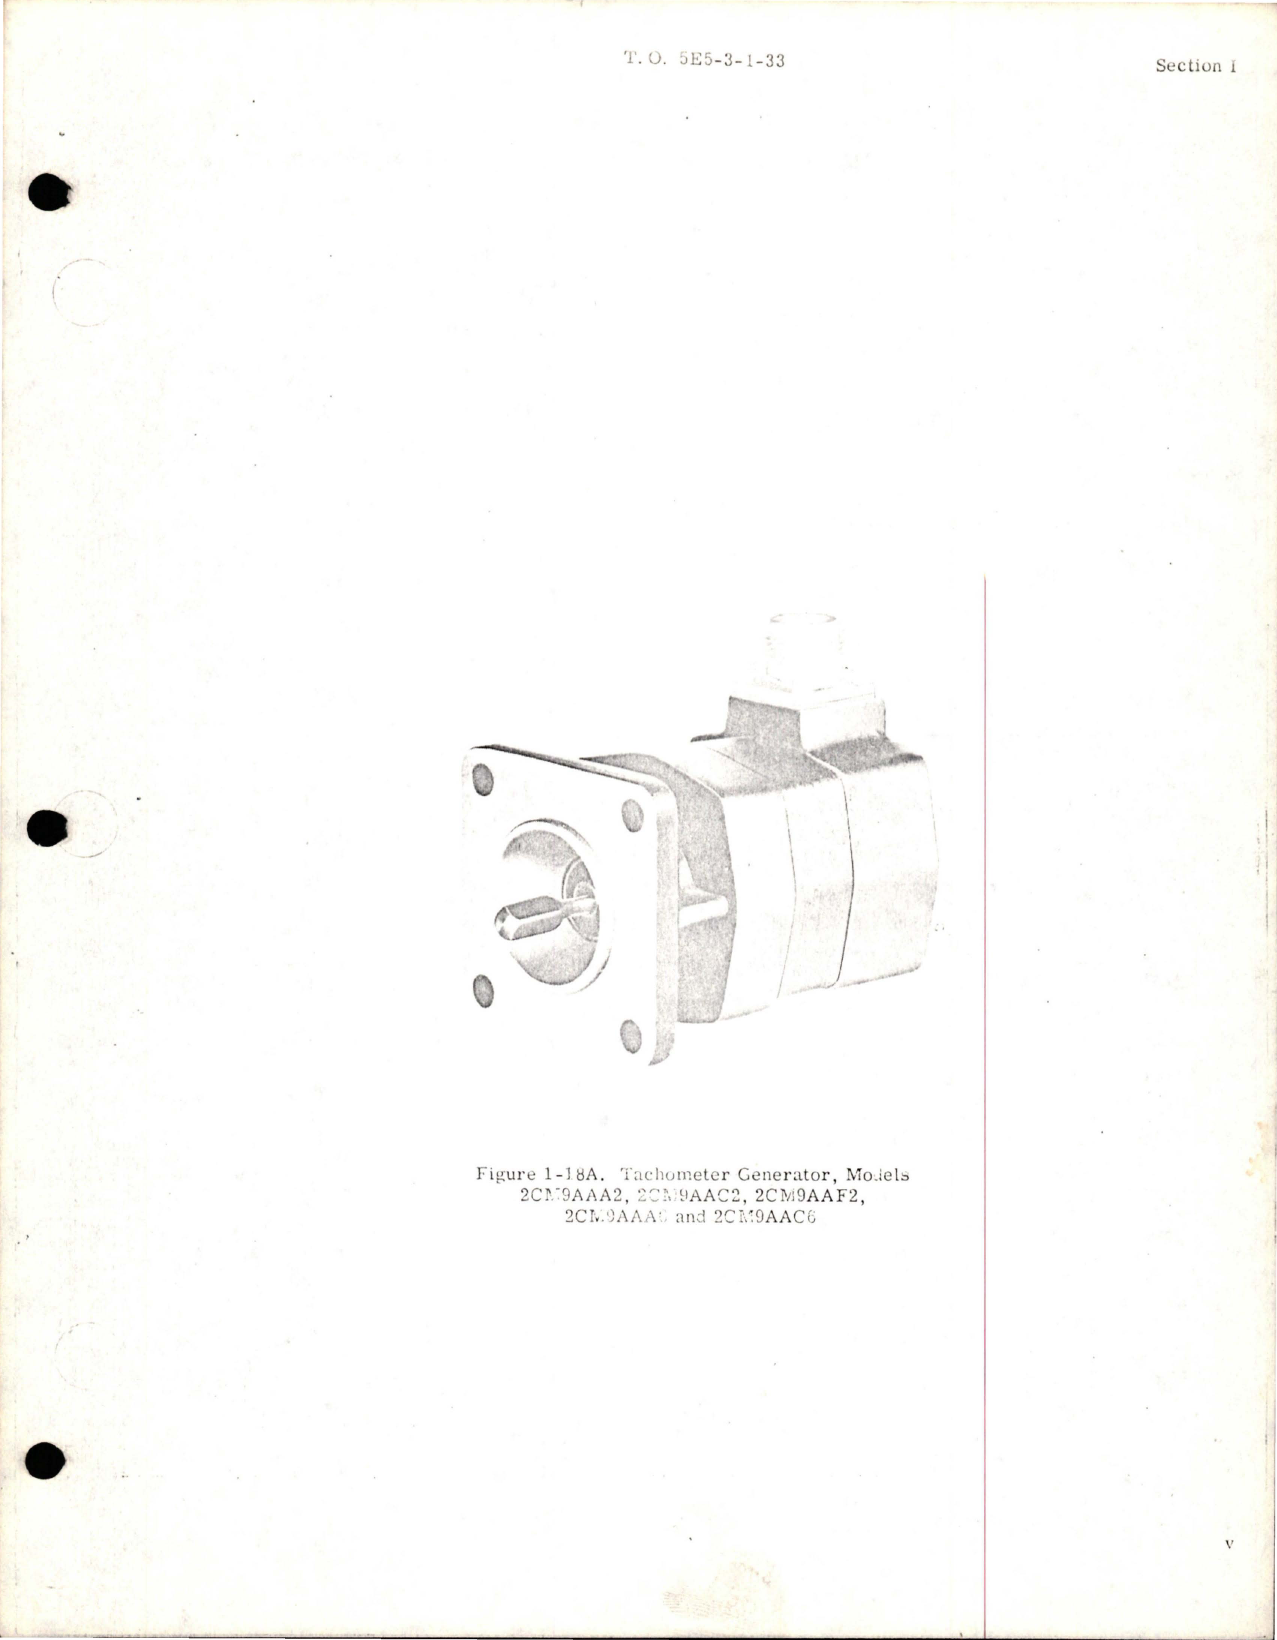 Sample page 9 from AirCorps Library document: Overhaul for Electric Tachometer